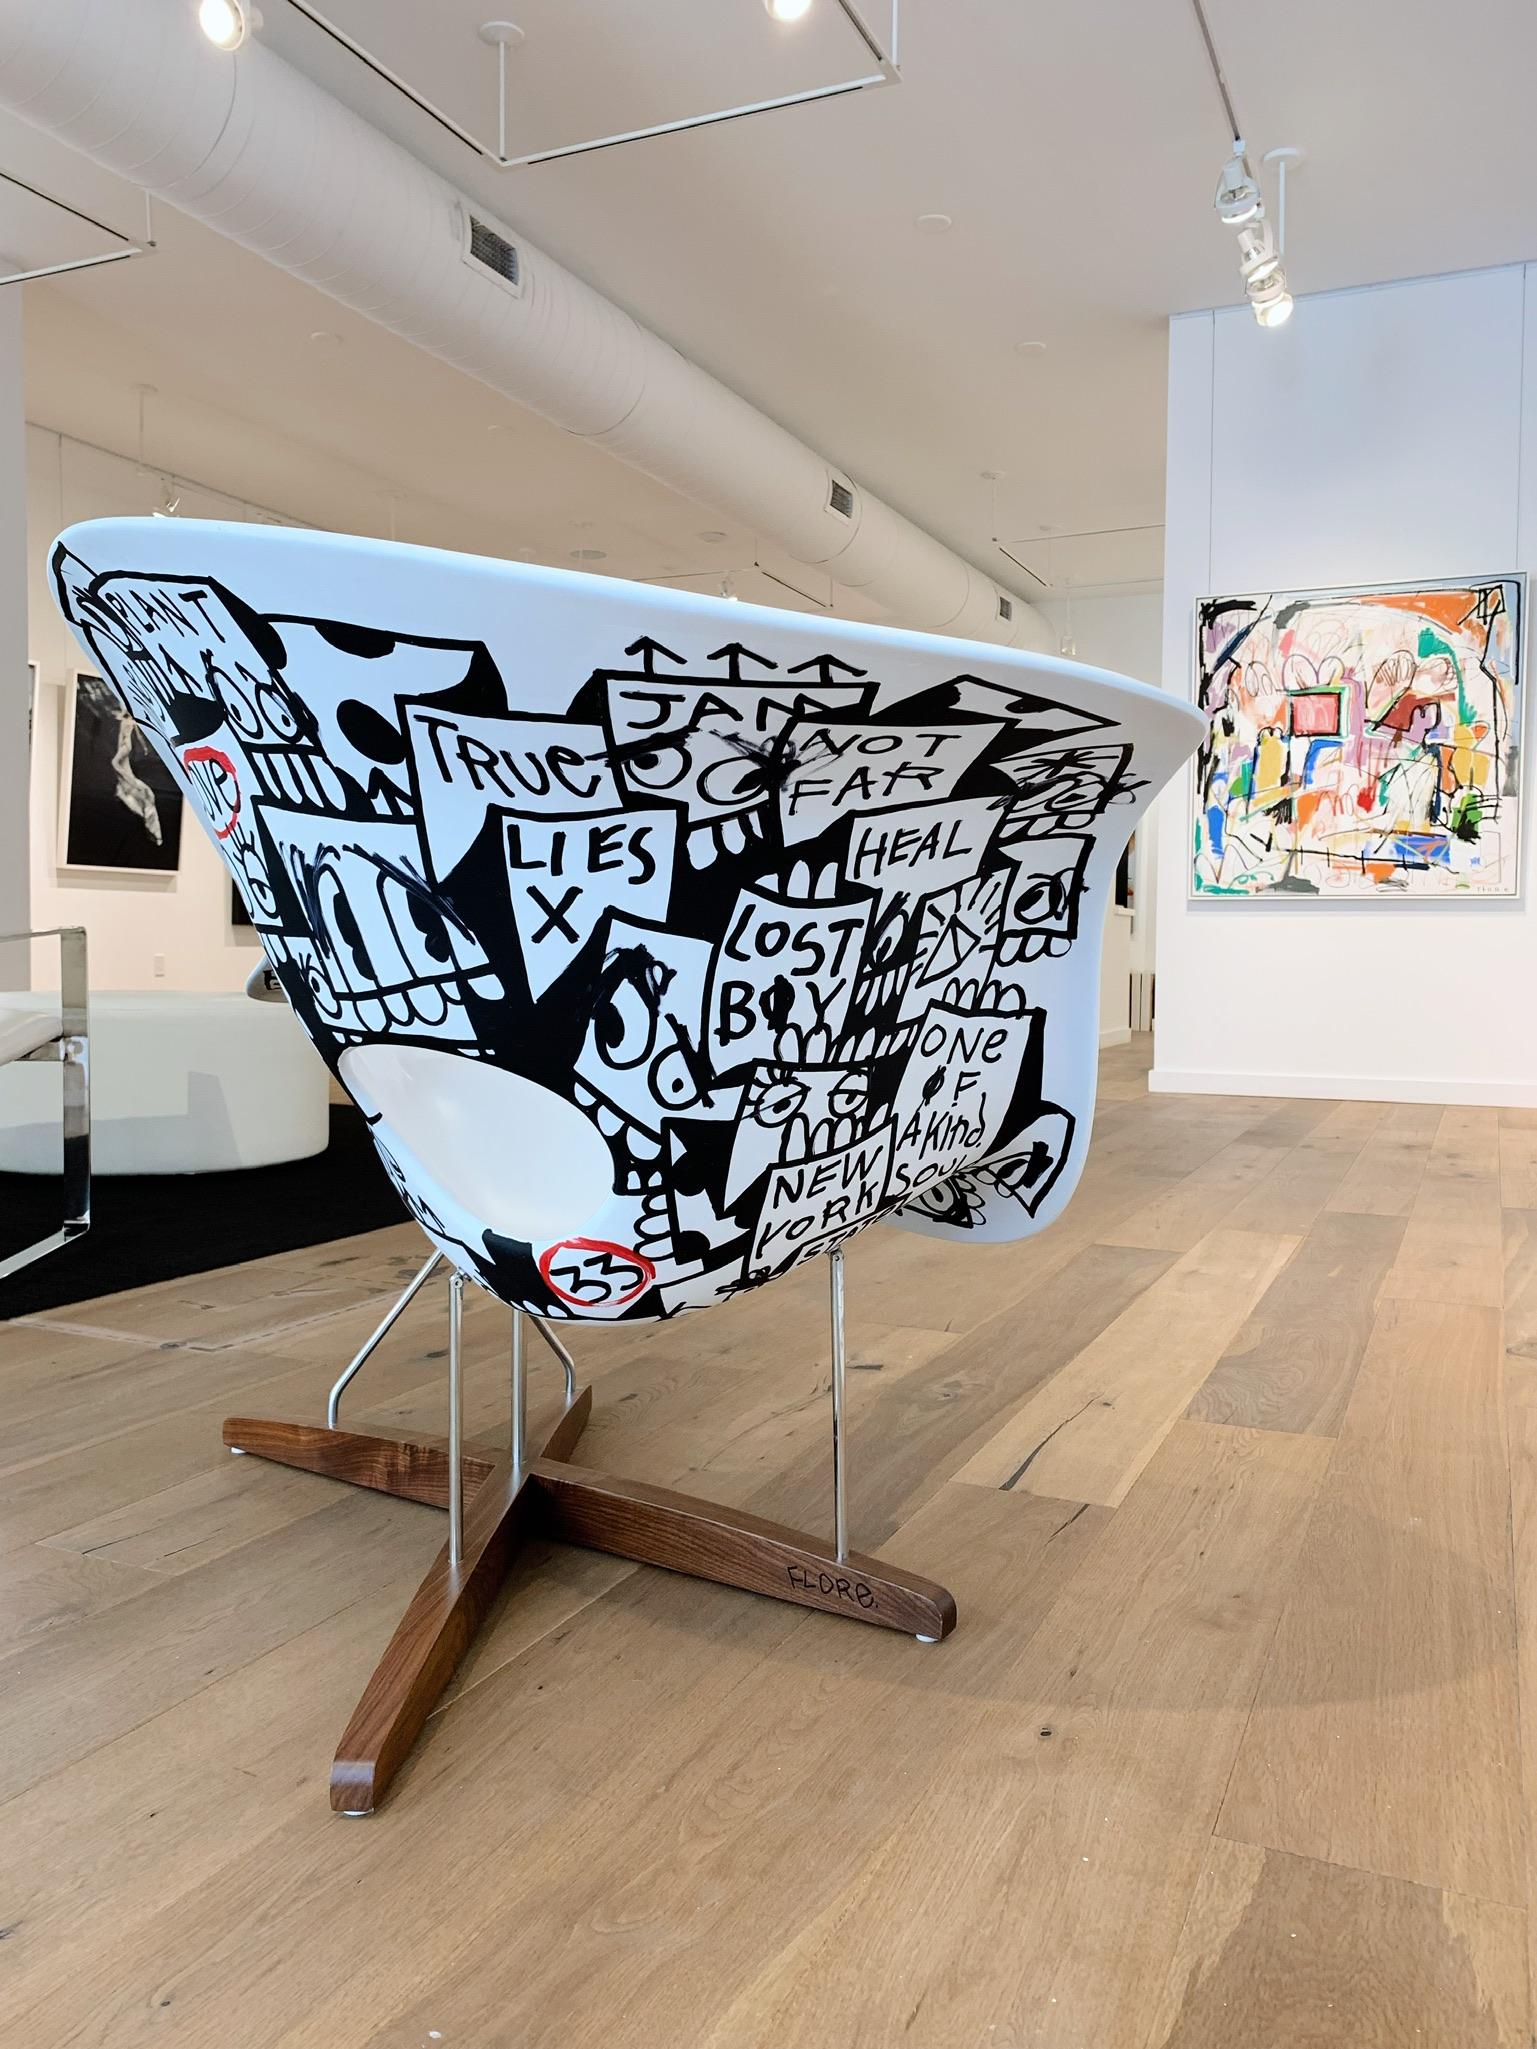 Flore
La Chaise Lounge Chair, 2019
Signed by artist
Acrylic on a white fiberglass shell chair with stainless steel rod base and a walnut base
59 x 33 x 33.8 inches
This piece is unique

street art 
pop art
Keith Hering
original painting
street